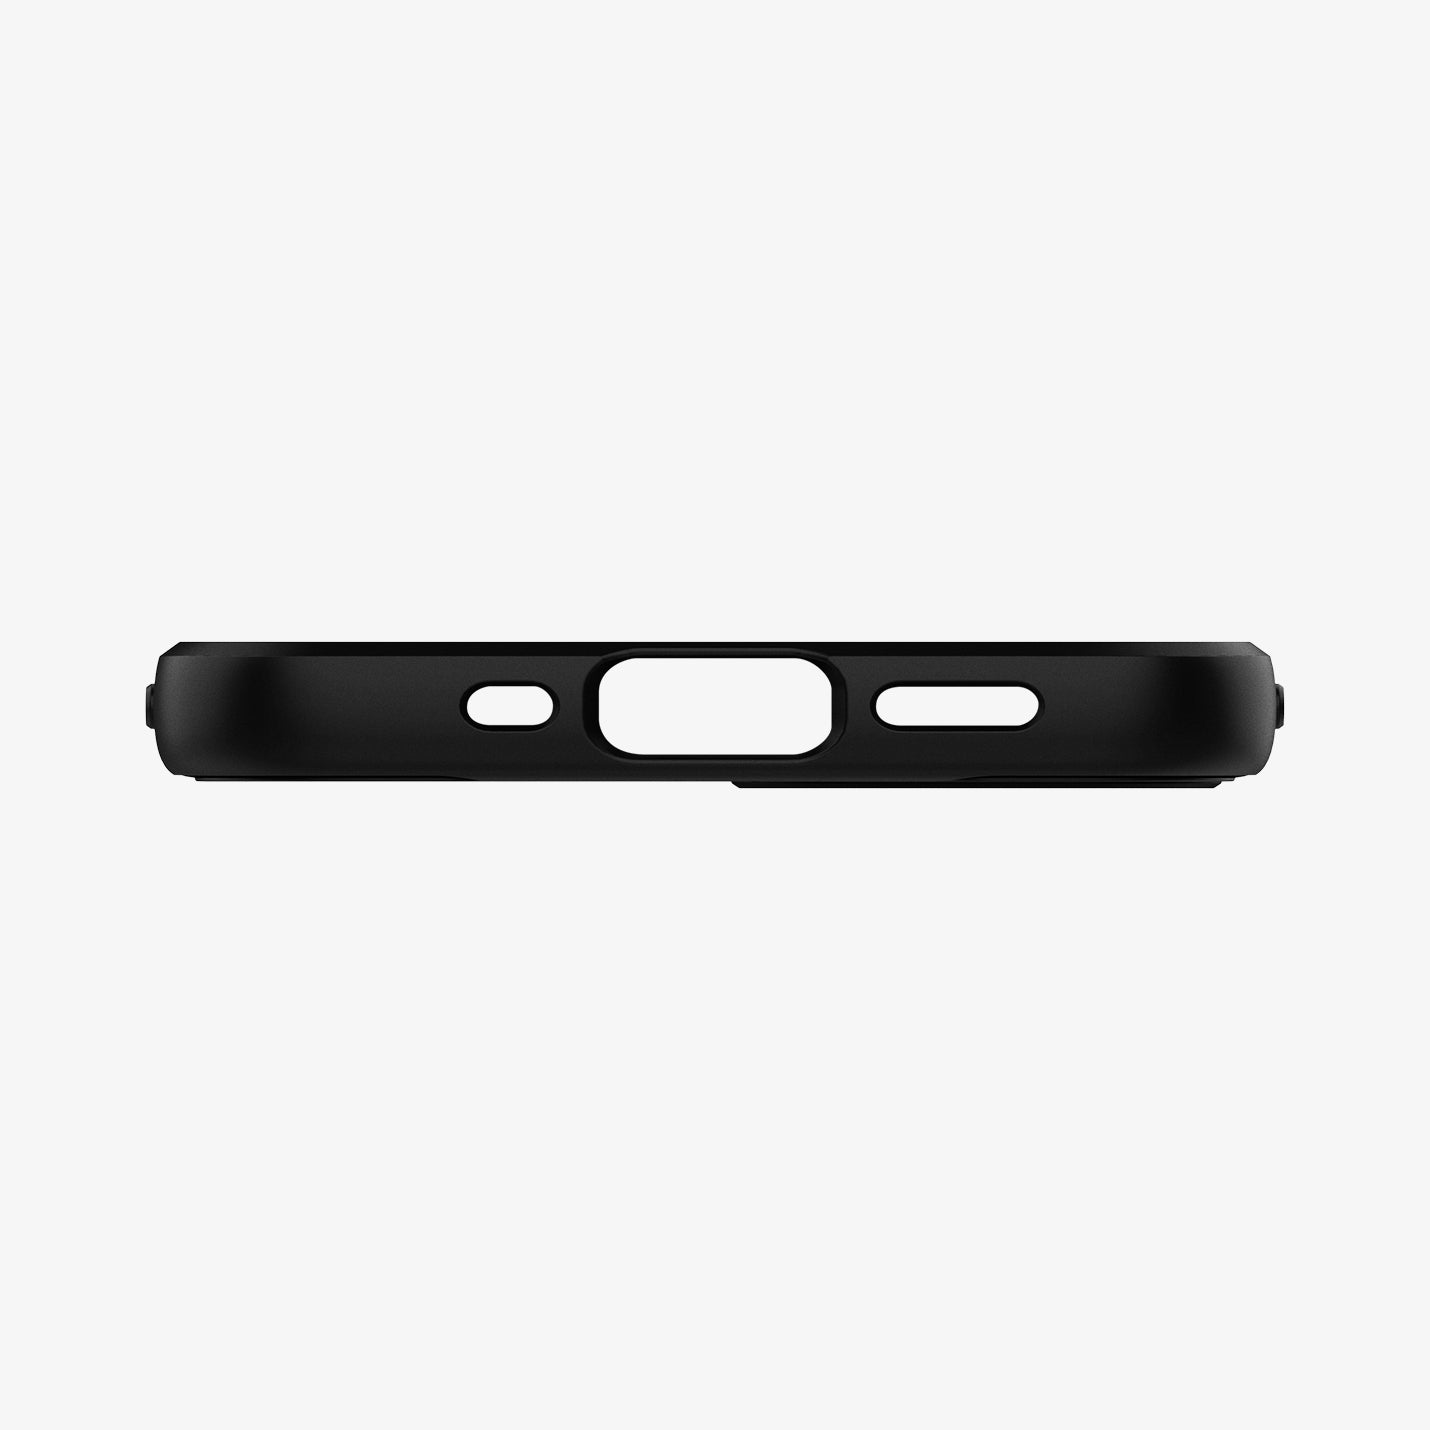 ACS01537 - iPhone 12 Mini Case Core Armor in matte black showing the bottom with precise cutouts